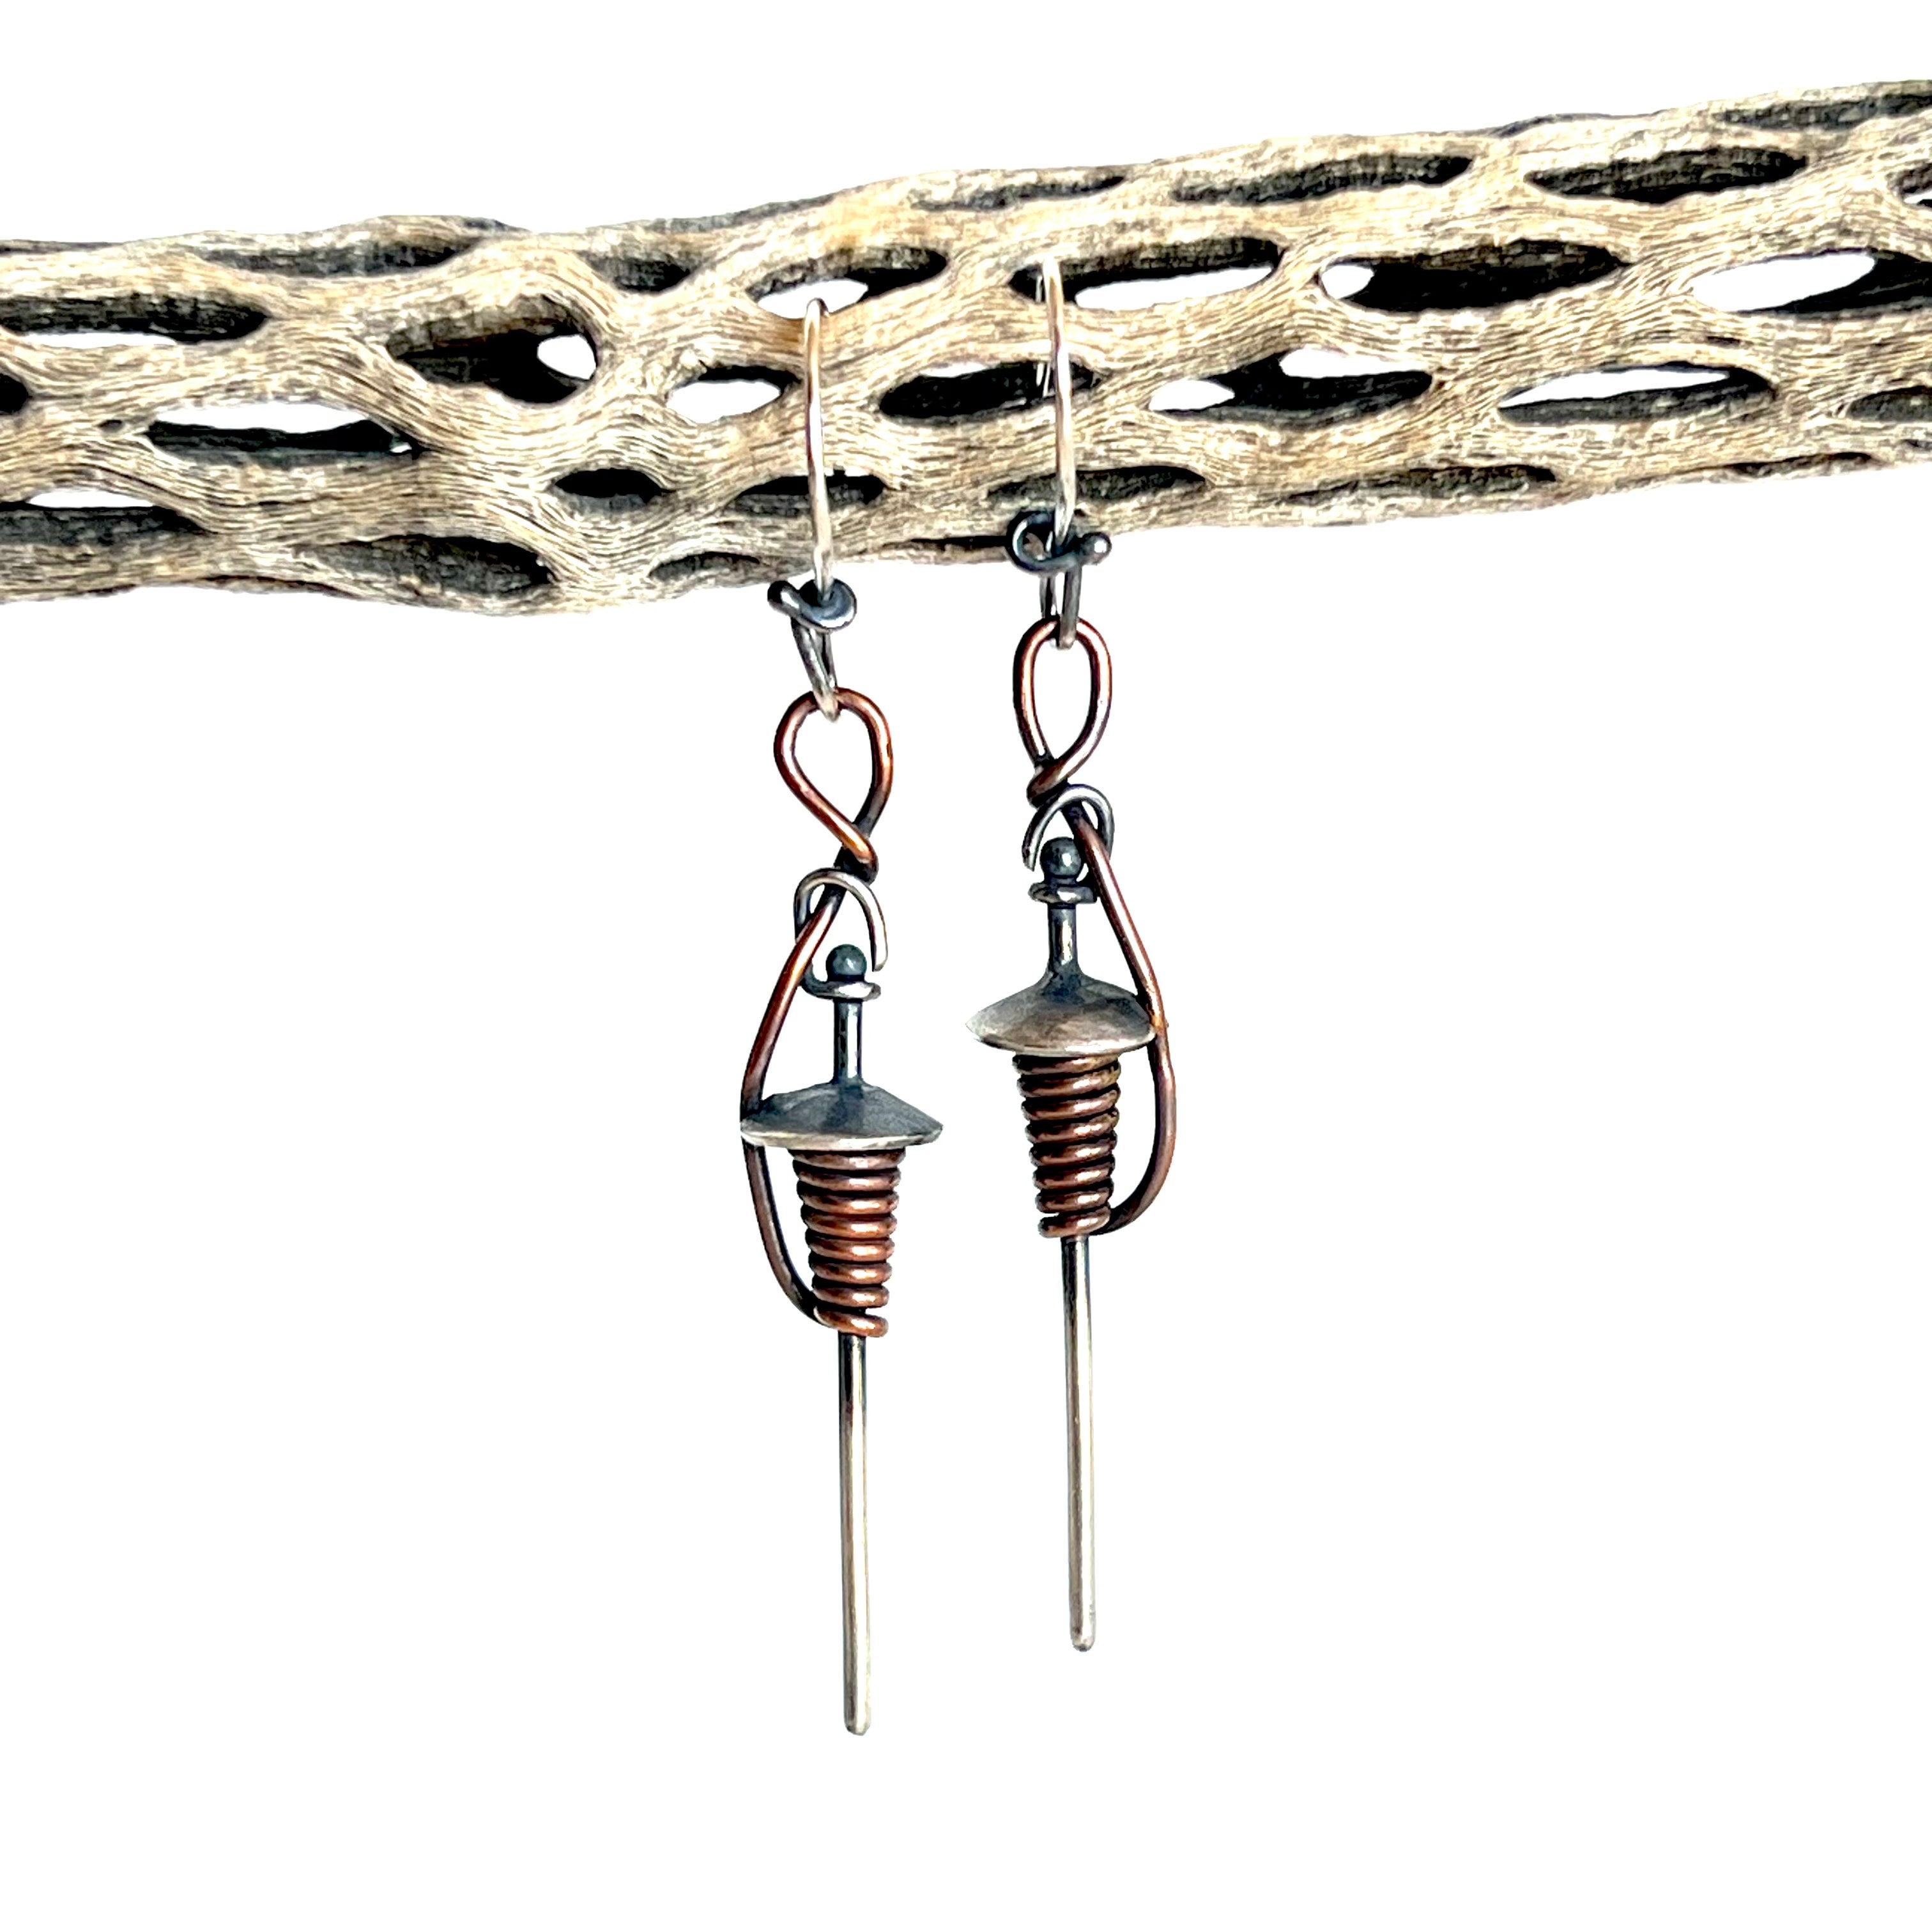 Top Whorl - Drop Spindle Earrings - Sterling and Copper